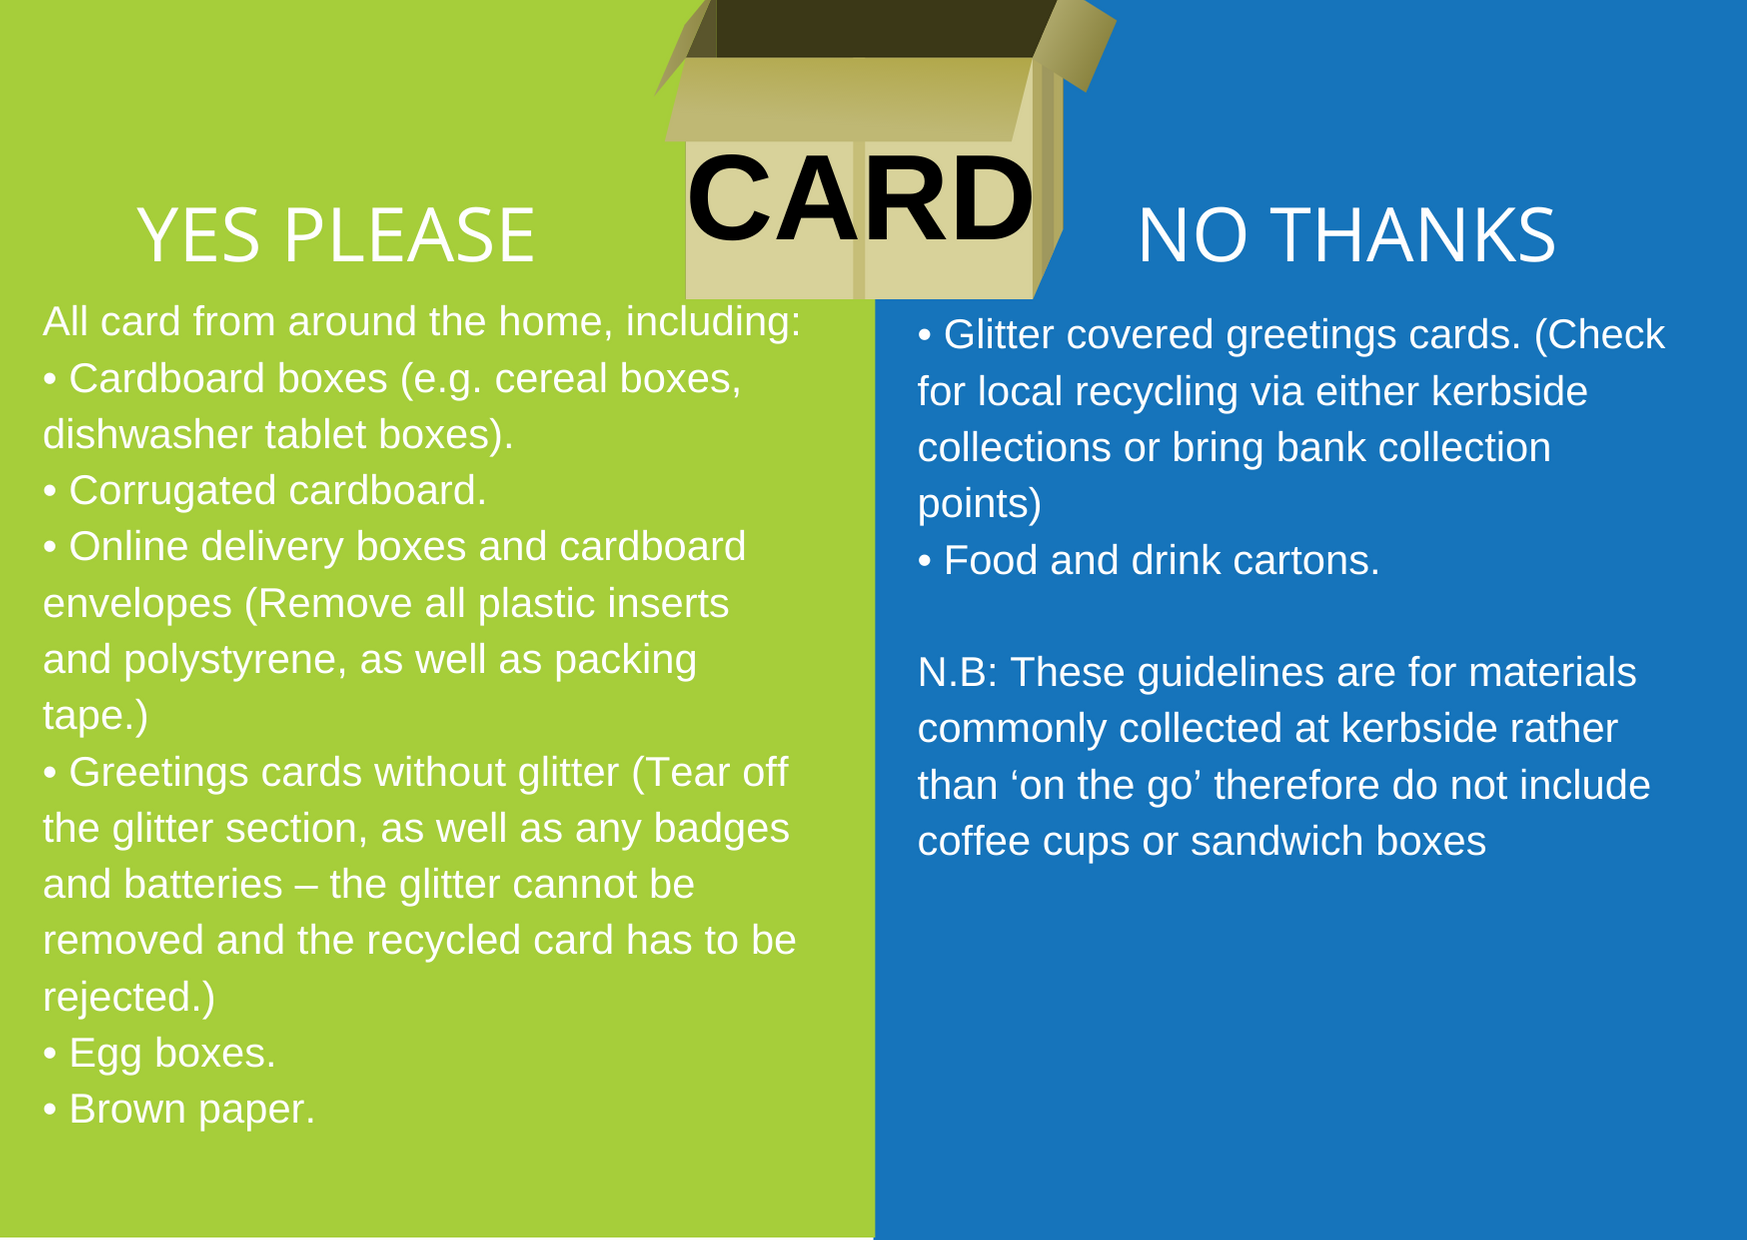 What card can i recycle